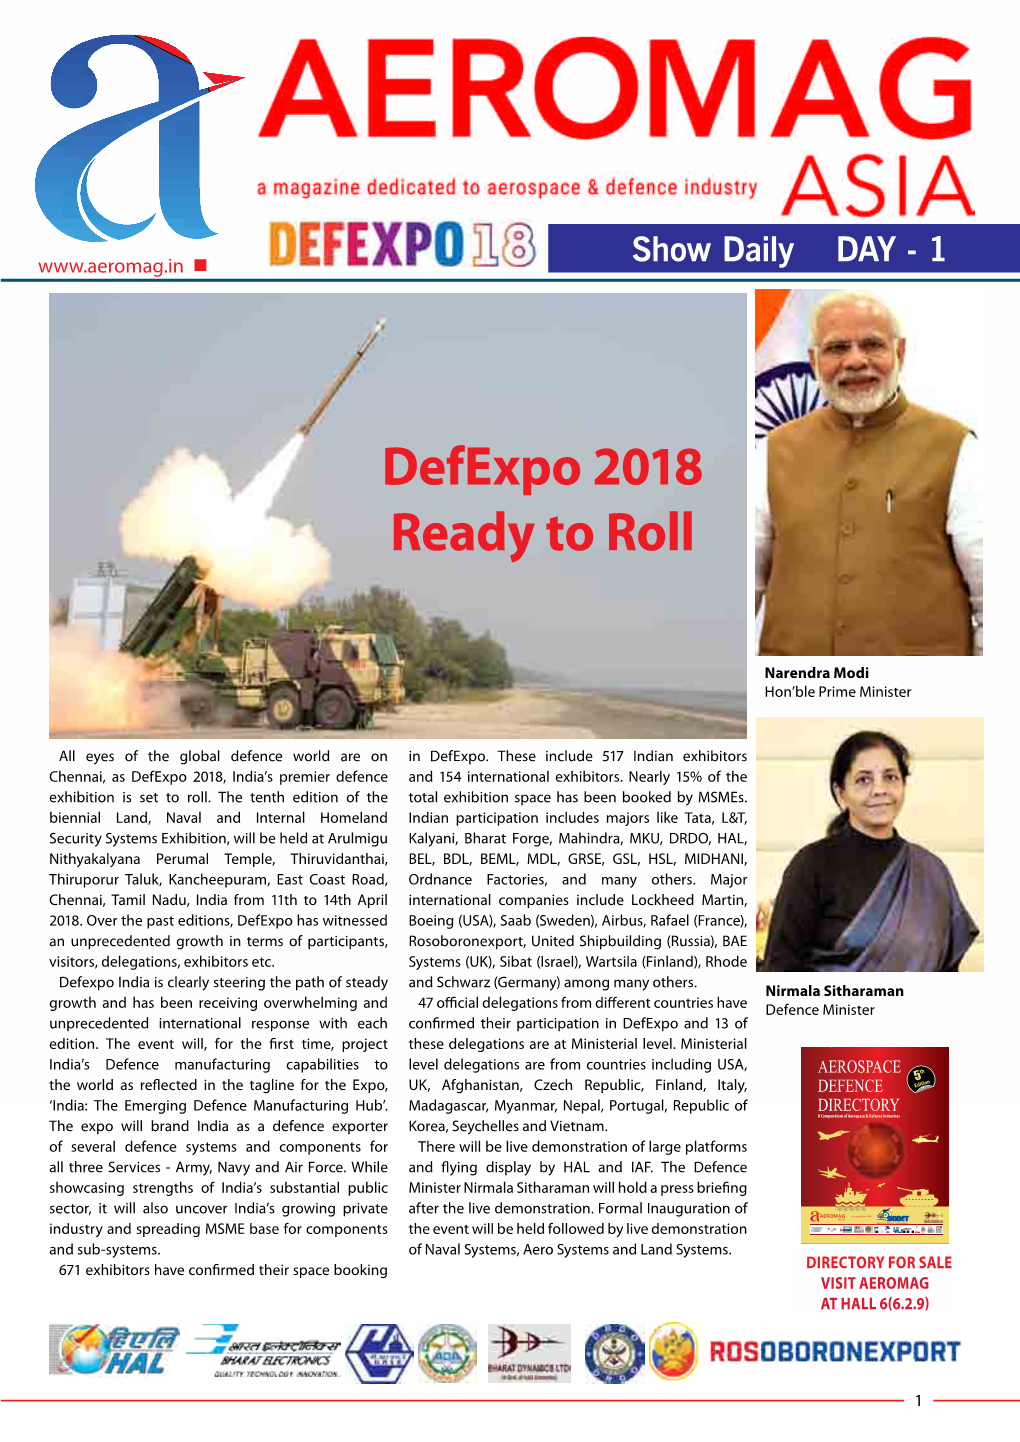 Defexpo 2018 Ready to Roll